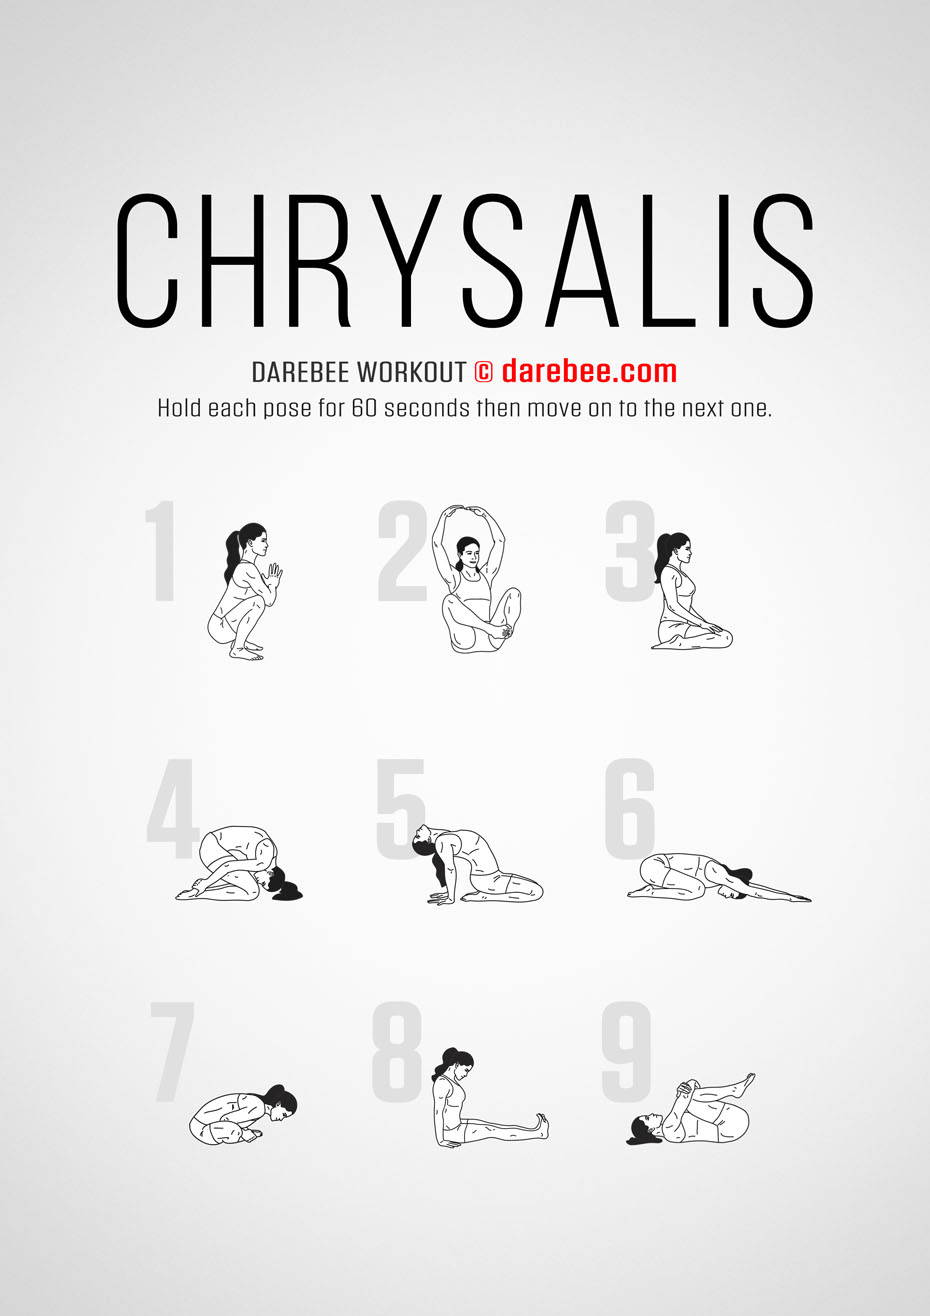 Chrysalis, by definition, is all about transformation. This is a Darebee home-fitness workout that helps you transition to a calmer, more balanced state of being in your body and your mind.